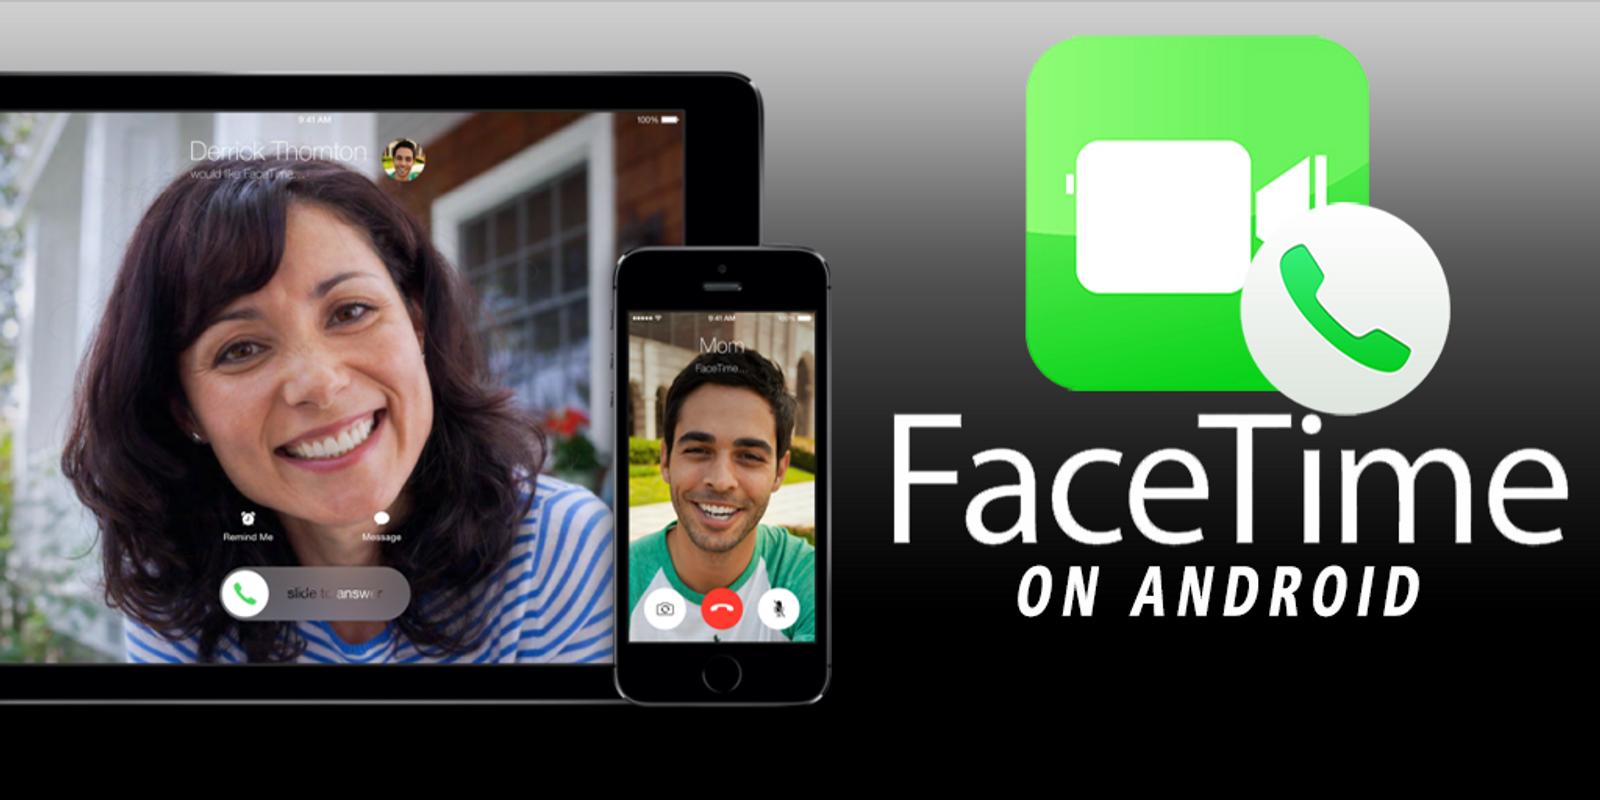 facetime for android download